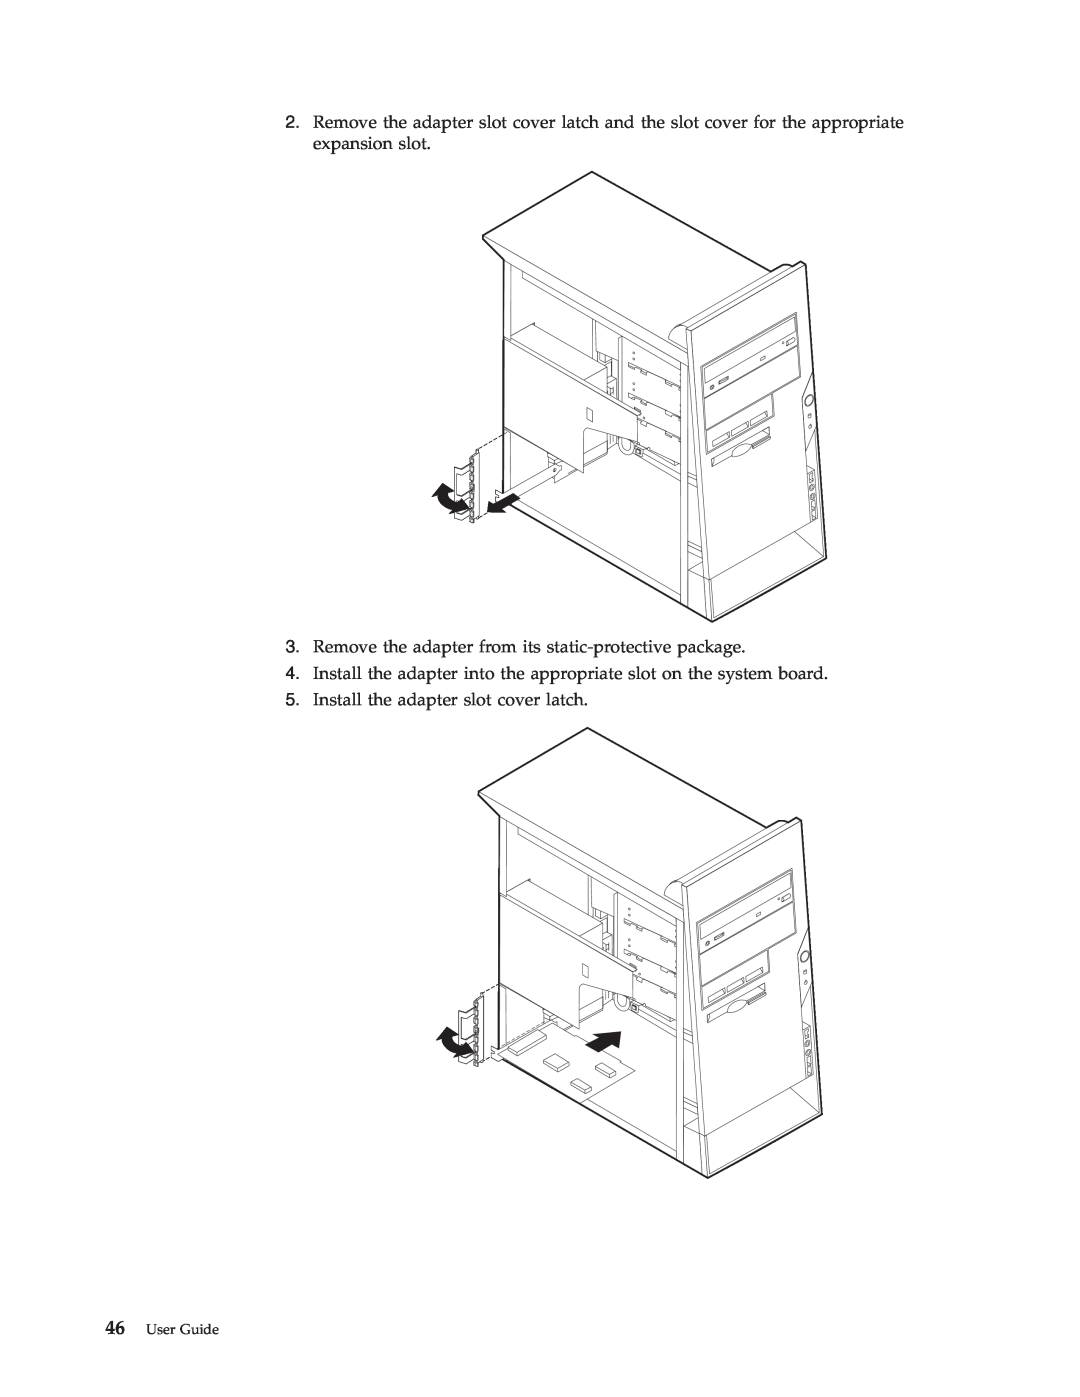 IBM Partner Pavilion 6794 Remove the adapter from its static-protective package, Install the adapter slot cover latch 